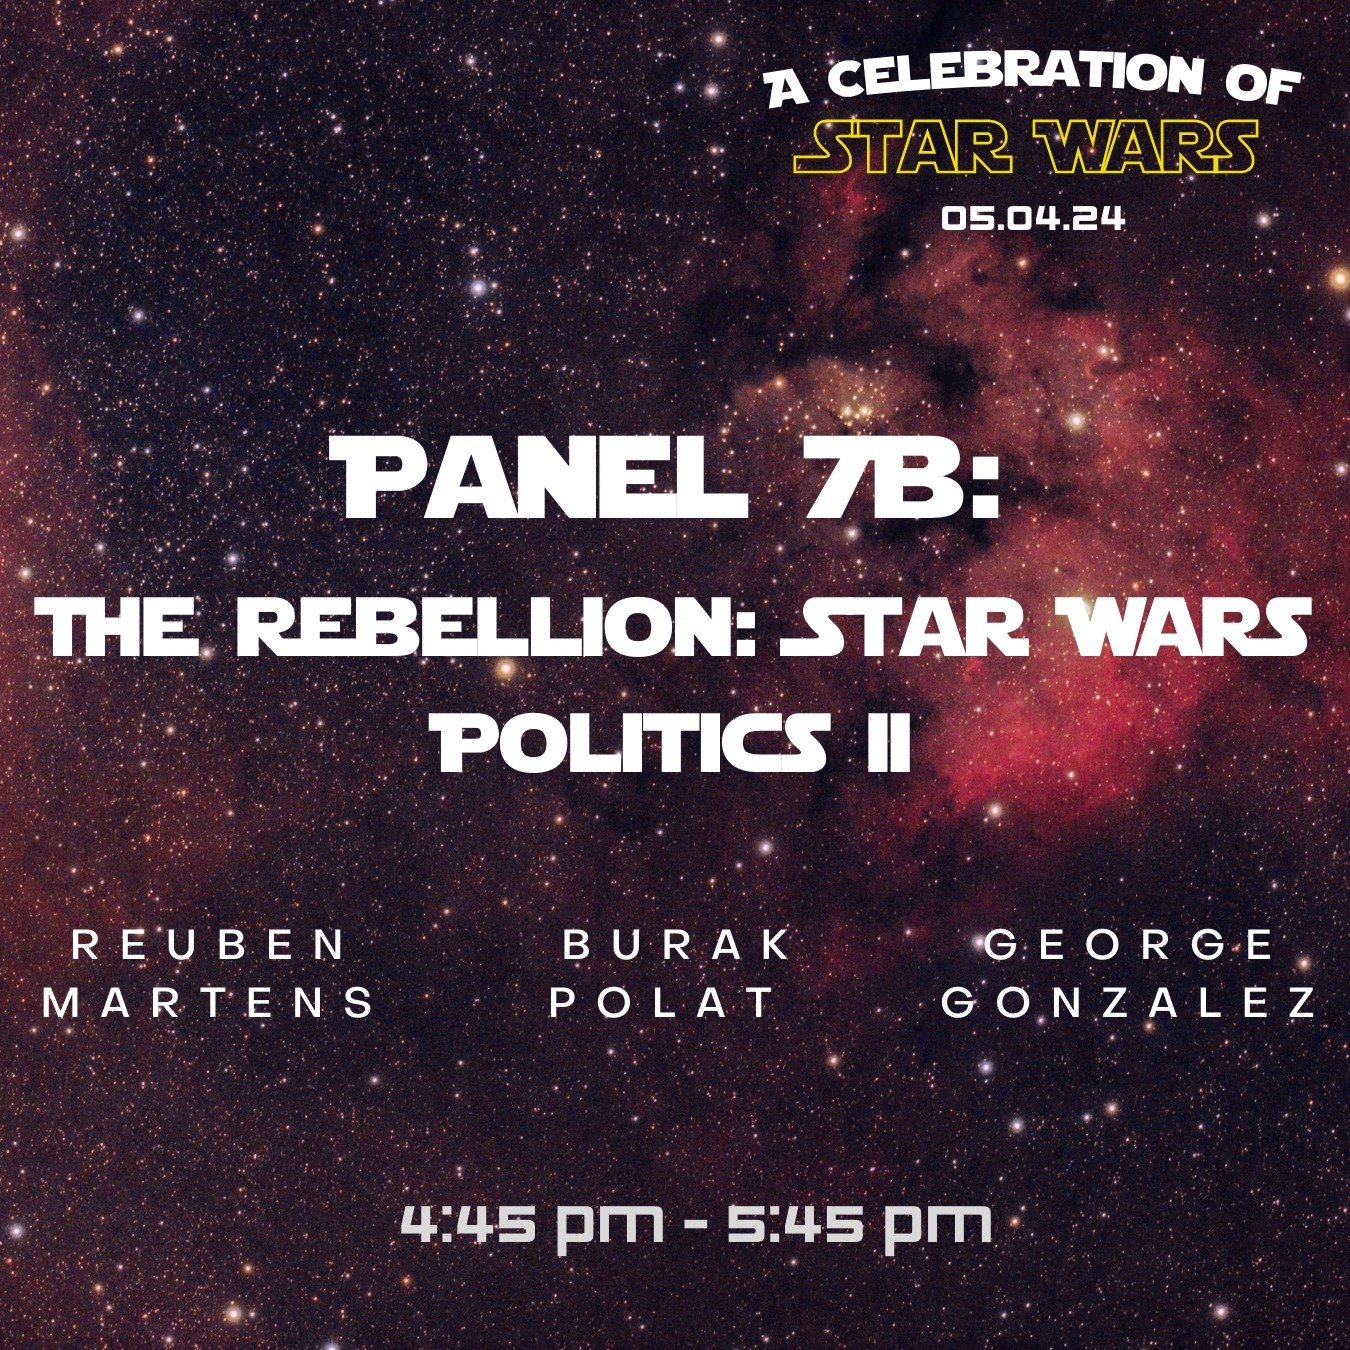 Panel 7B, &ldquo;The Rebellion: Star Wars Politics II,&rdquo; will be taking place in Room 805 and online from 4:45 pm - 5:45 pm!